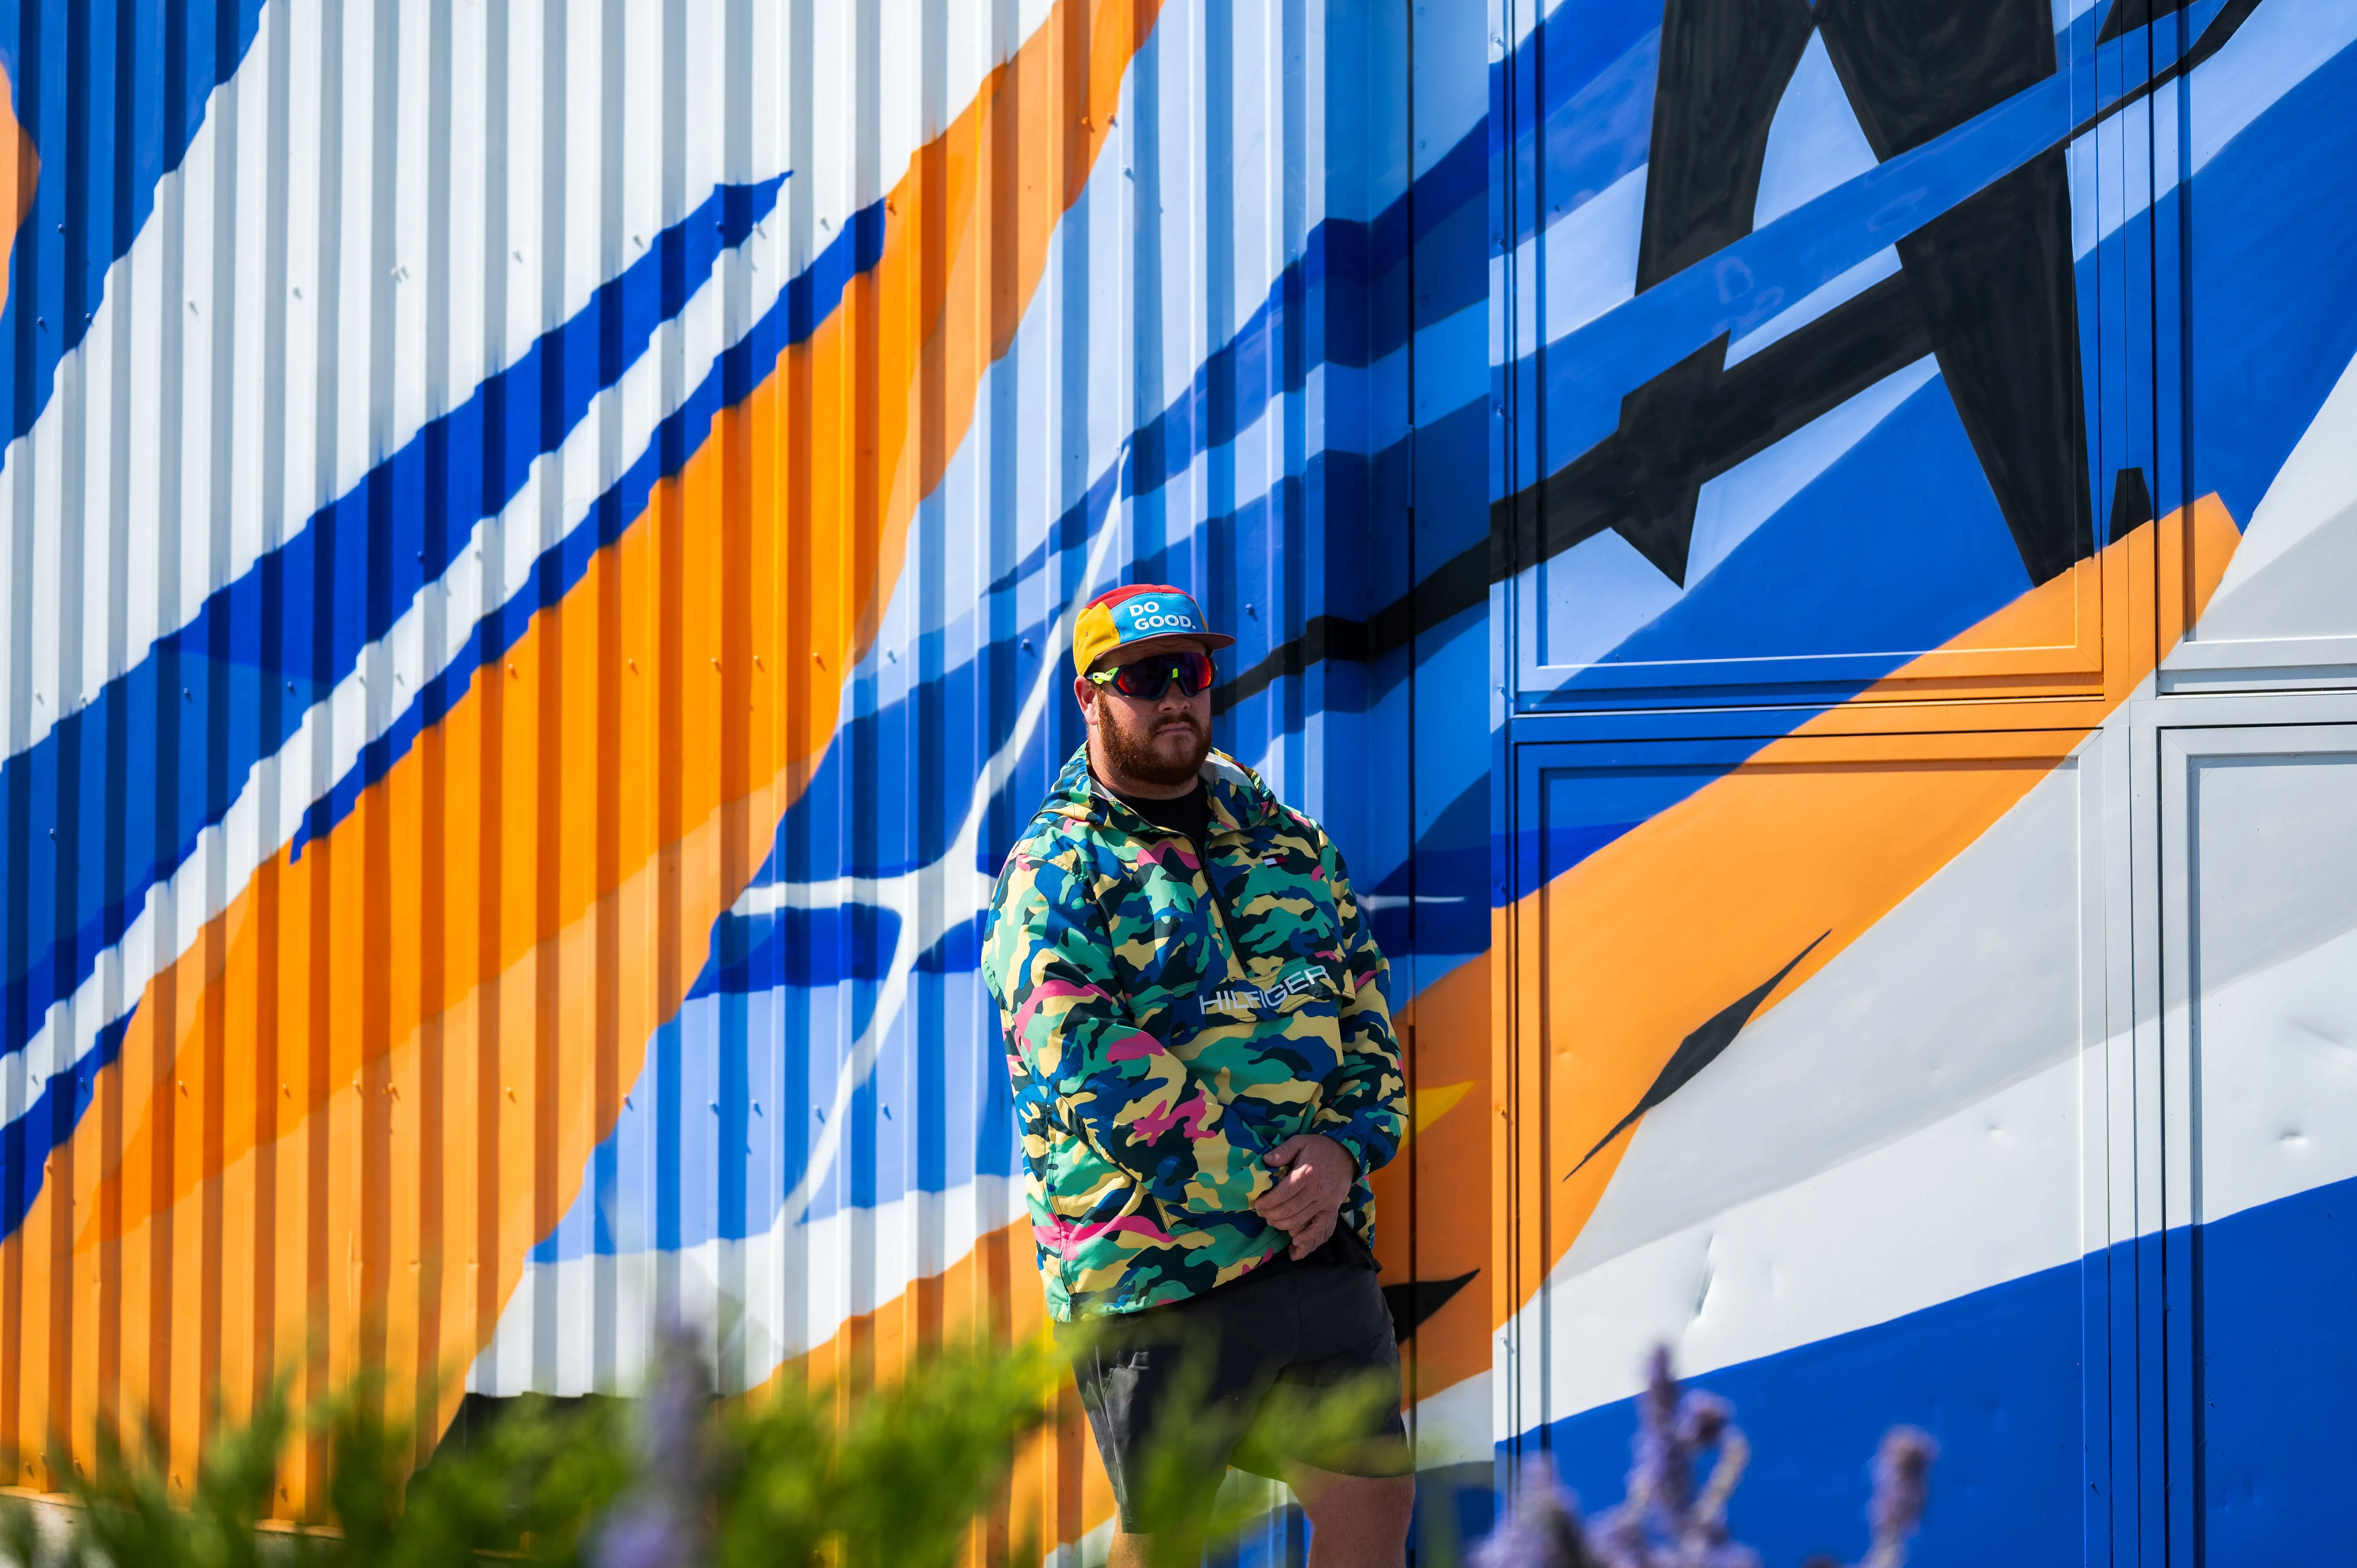 Man standing in front of a colorful abstract mural, wearing a patterned jacket and sunglasses, with hands in pockets.